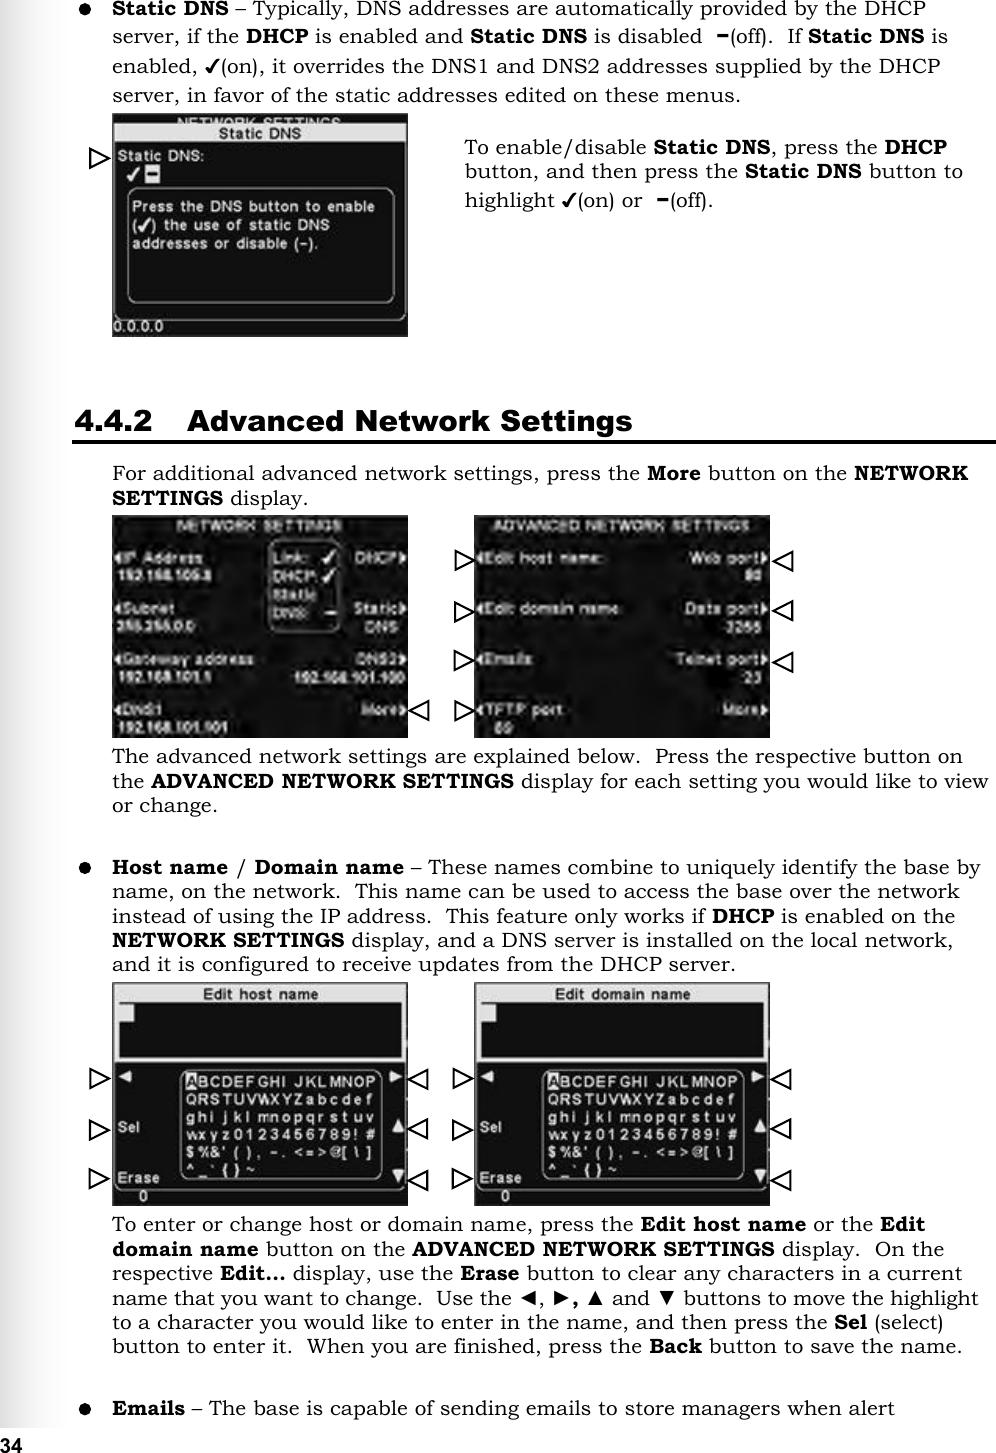   34  Static DNS – Typically, DNS addresses are automatically provided by the DHCP server, if the DHCP is enabled and Static DNS is disabled  −(off).  If Static DNS is enabled, ✔(on), it overrides the DNS1 and DNS2 addresses supplied by the DHCP server, in favor of the static addresses edited on these menus.     4.4.2 Advanced Network Settings For additional advanced network settings, press the More button on the NETWORK SETTINGS display.             The advanced network settings are explained below.  Press the respective button on the ADVANCED NETWORK SETTINGS display for each setting you would like to view or change.   Host name / Domain name – These names combine to uniquely identify the base by name, on the network.  This name can be used to access the base over the network instead of using the IP address.  This feature only works if DHCP is enabled on the NETWORK SETTINGS display, and a DNS server is installed on the local network, and it is configured to receive updates from the DHCP server.             To enter or change host or domain name, press the Edit host name or the Edit domain name button on the ADVANCED NETWORK SETTINGS display.  On the respective Edit… display, use the Erase button to clear any characters in a current name that you want to change.  Use the ◄, ►, ▲ and ▼ buttons to move the highlight to a character you would like to enter in the name, and then press the Sel (select) button to enter it.  When you are finished, press the Back button to save the name.   Emails – The base is capable of sending emails to store managers when alert To enable/disable Static DNS, press the DHCP button, and then press the Static DNS button to highlight ✔(on) or  −(off).    